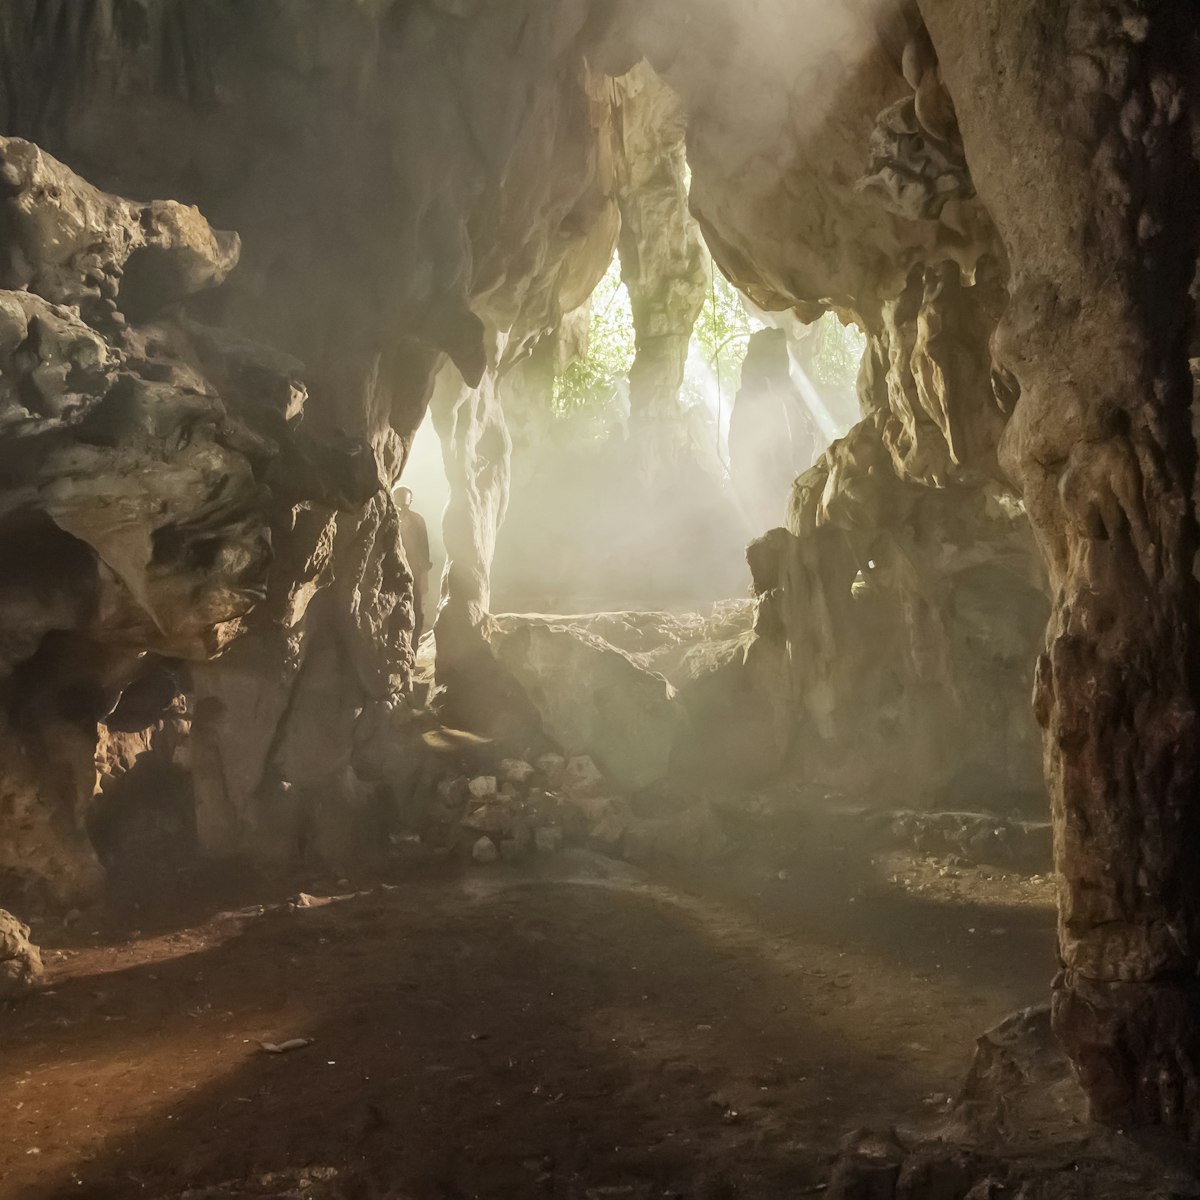 Ambrosio cave at Cuba; Shutterstock ID 240100270; Your name (First / Last): Josh Vogel; GL account no.: 56530; Netsuite department name: Online Design; Full Product or Project name including edition: Digital Content/Sights